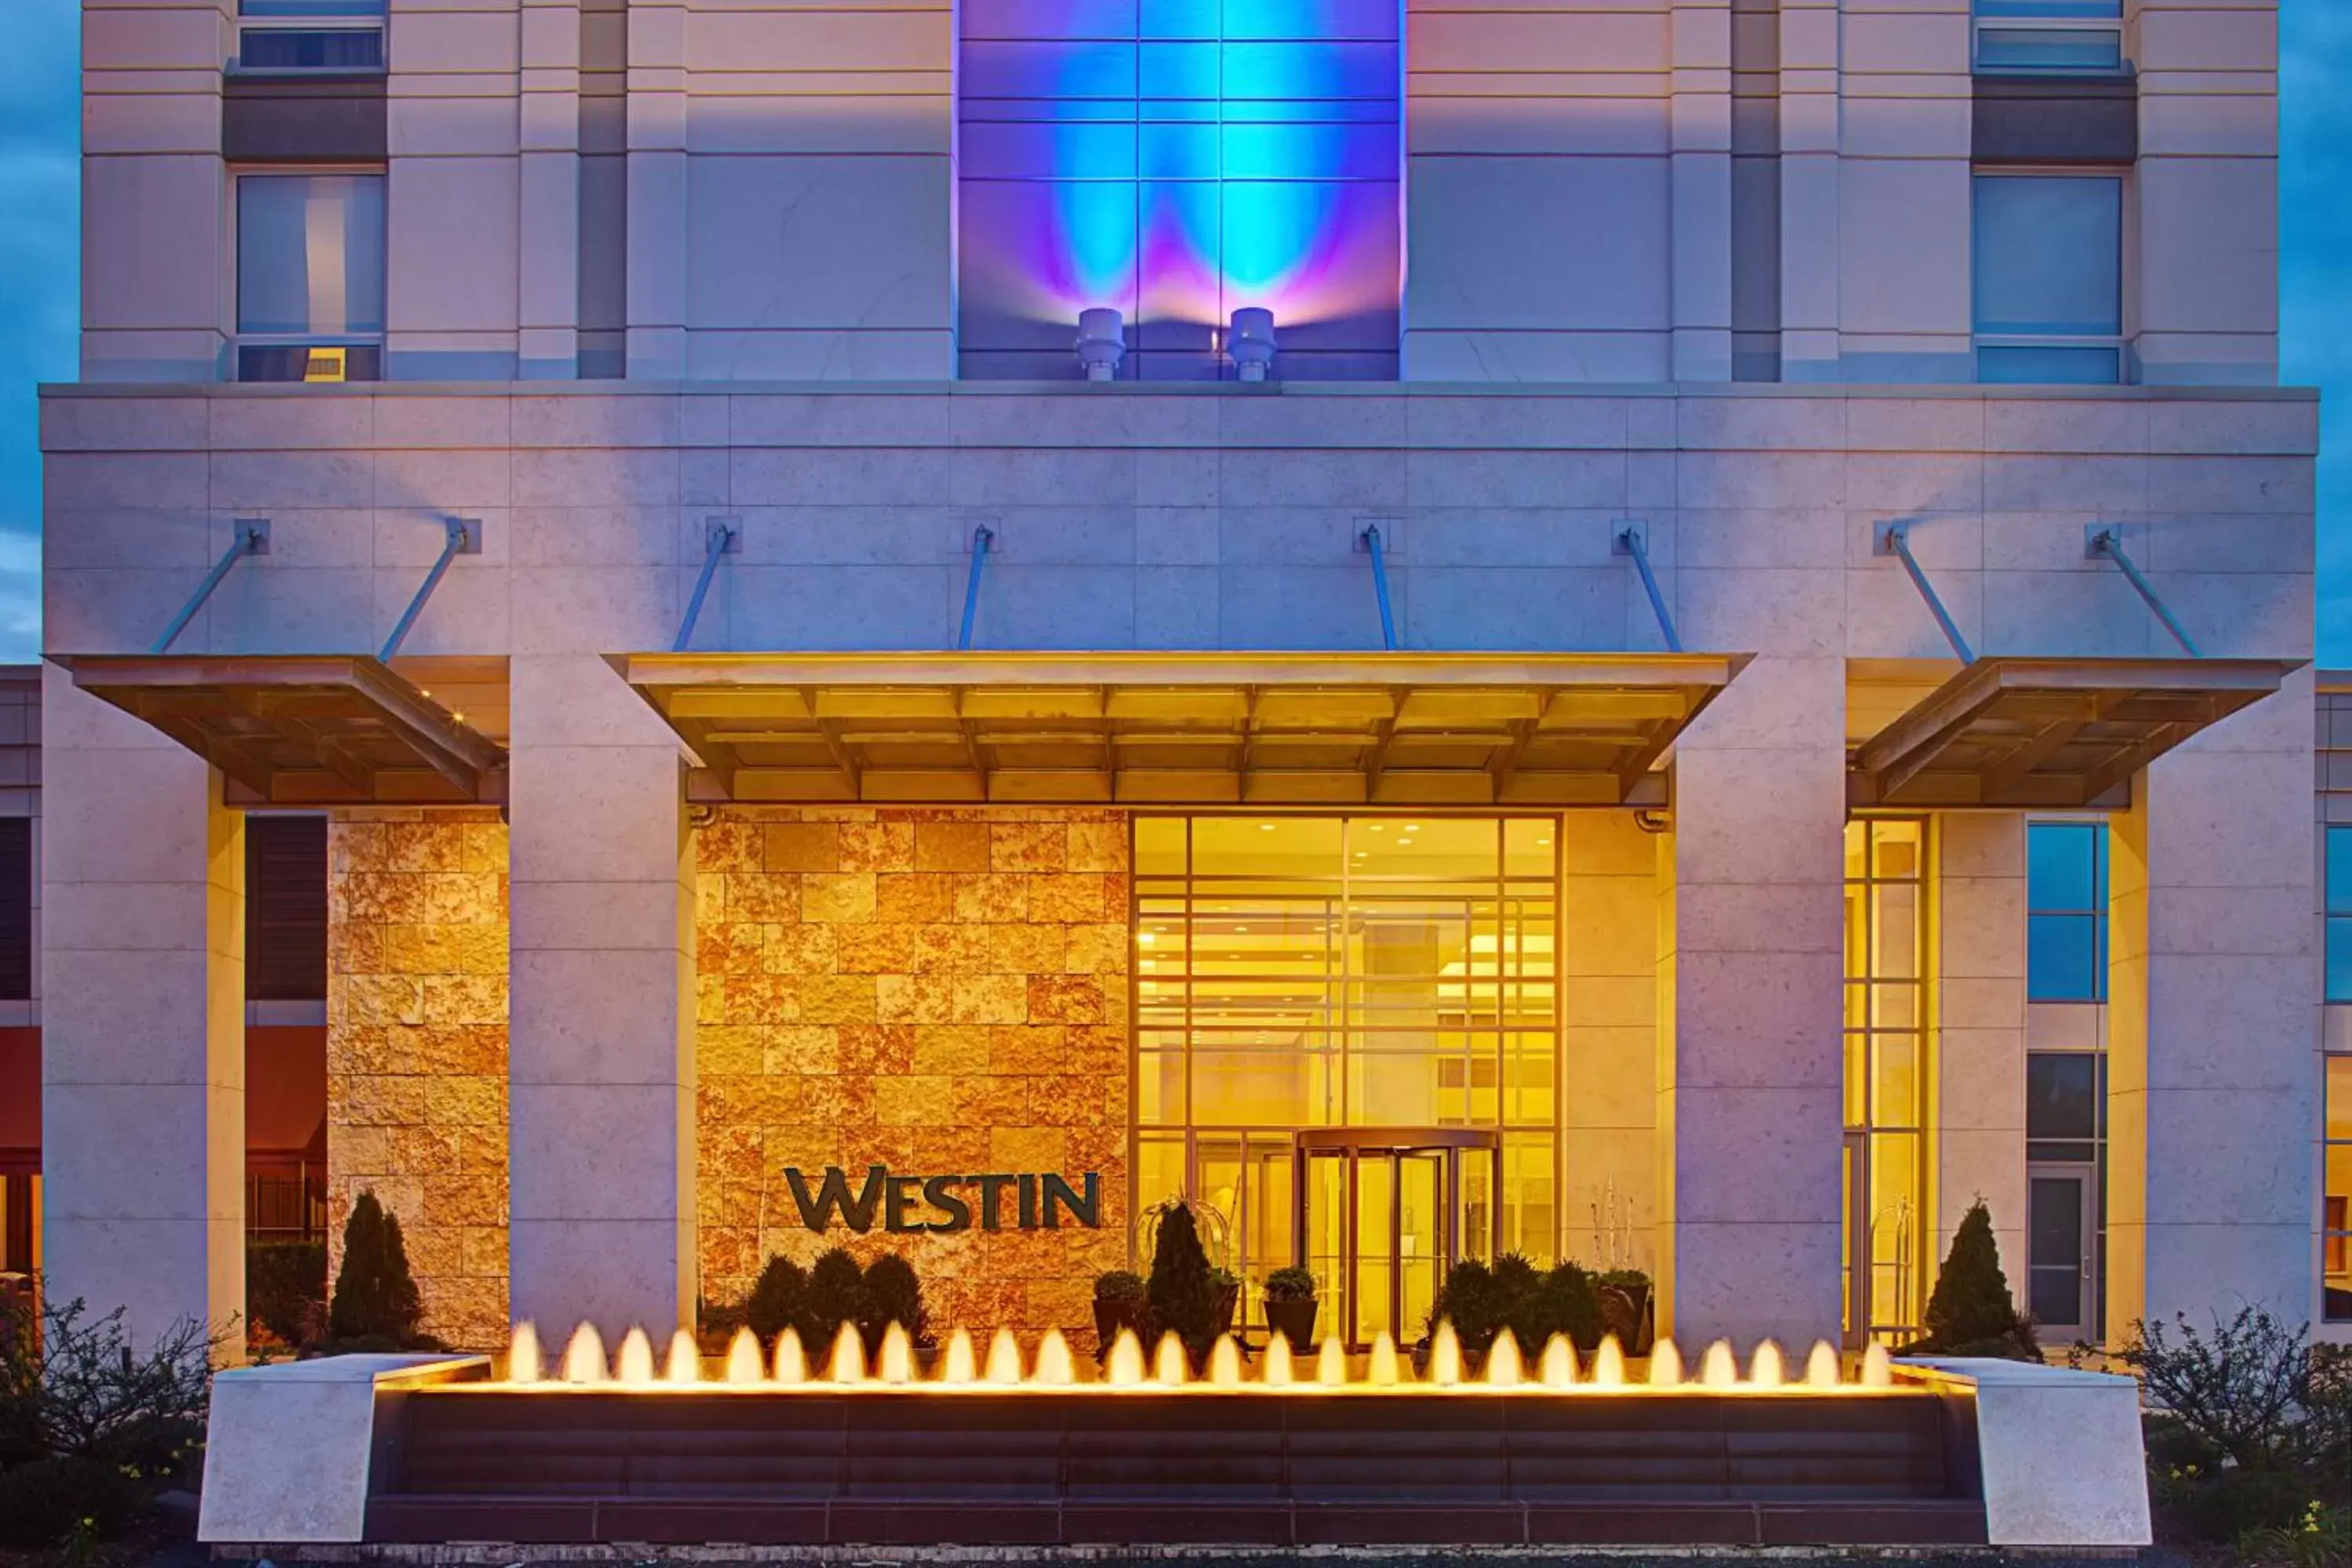 Property building in The Westin Chicago North Shore